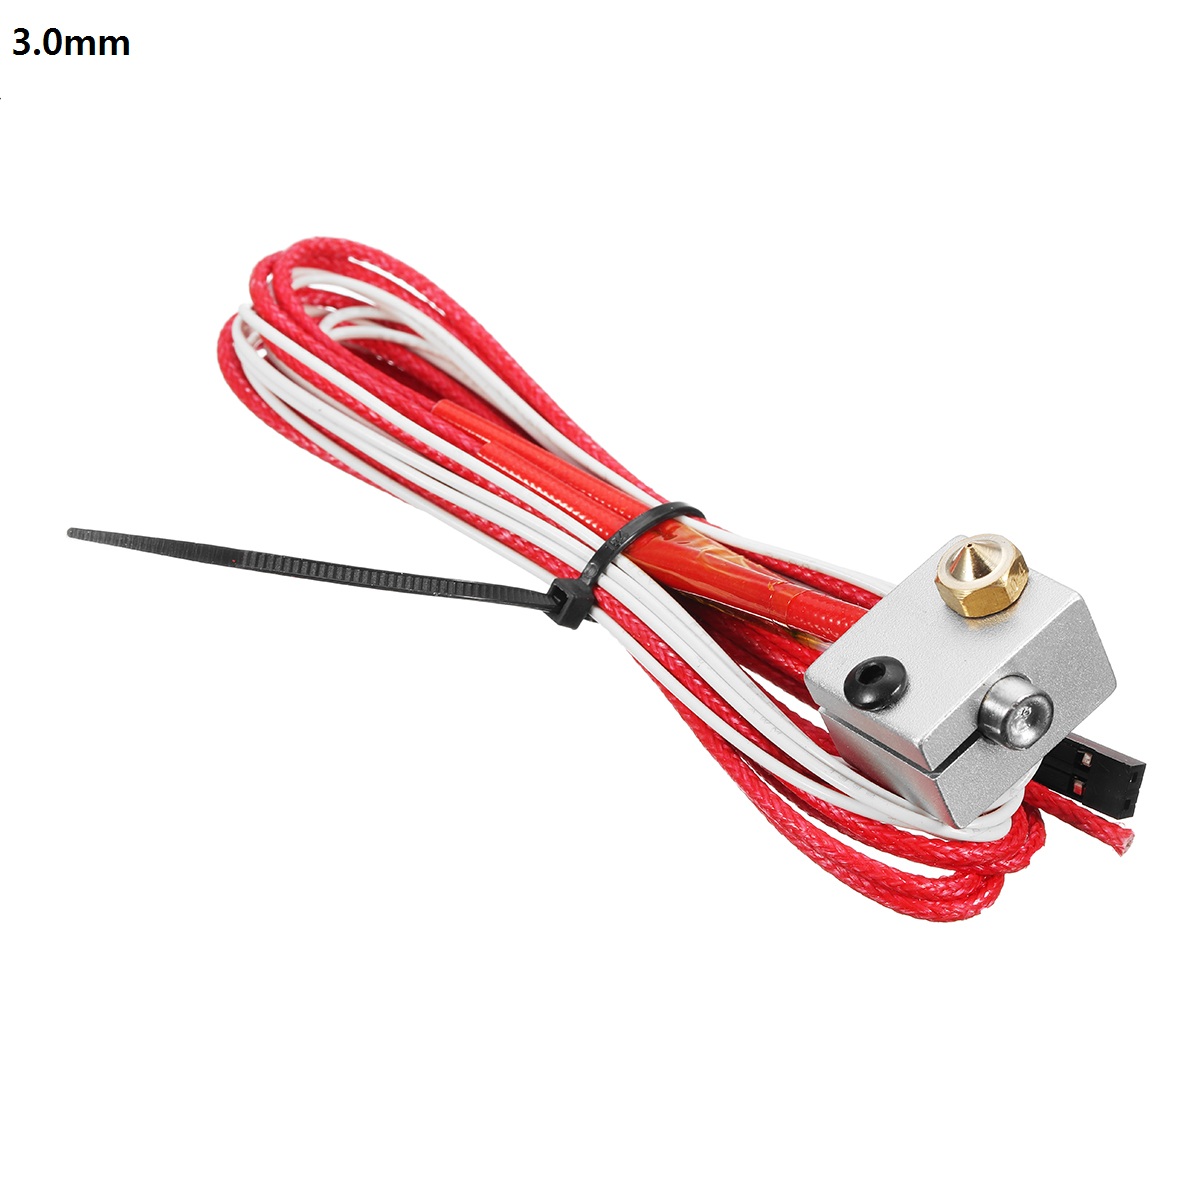 1.75mm/3.0mm Fialment 0.4mm Nozzle Upgraded Dual Head Extruder Kit for 3D Printer 17